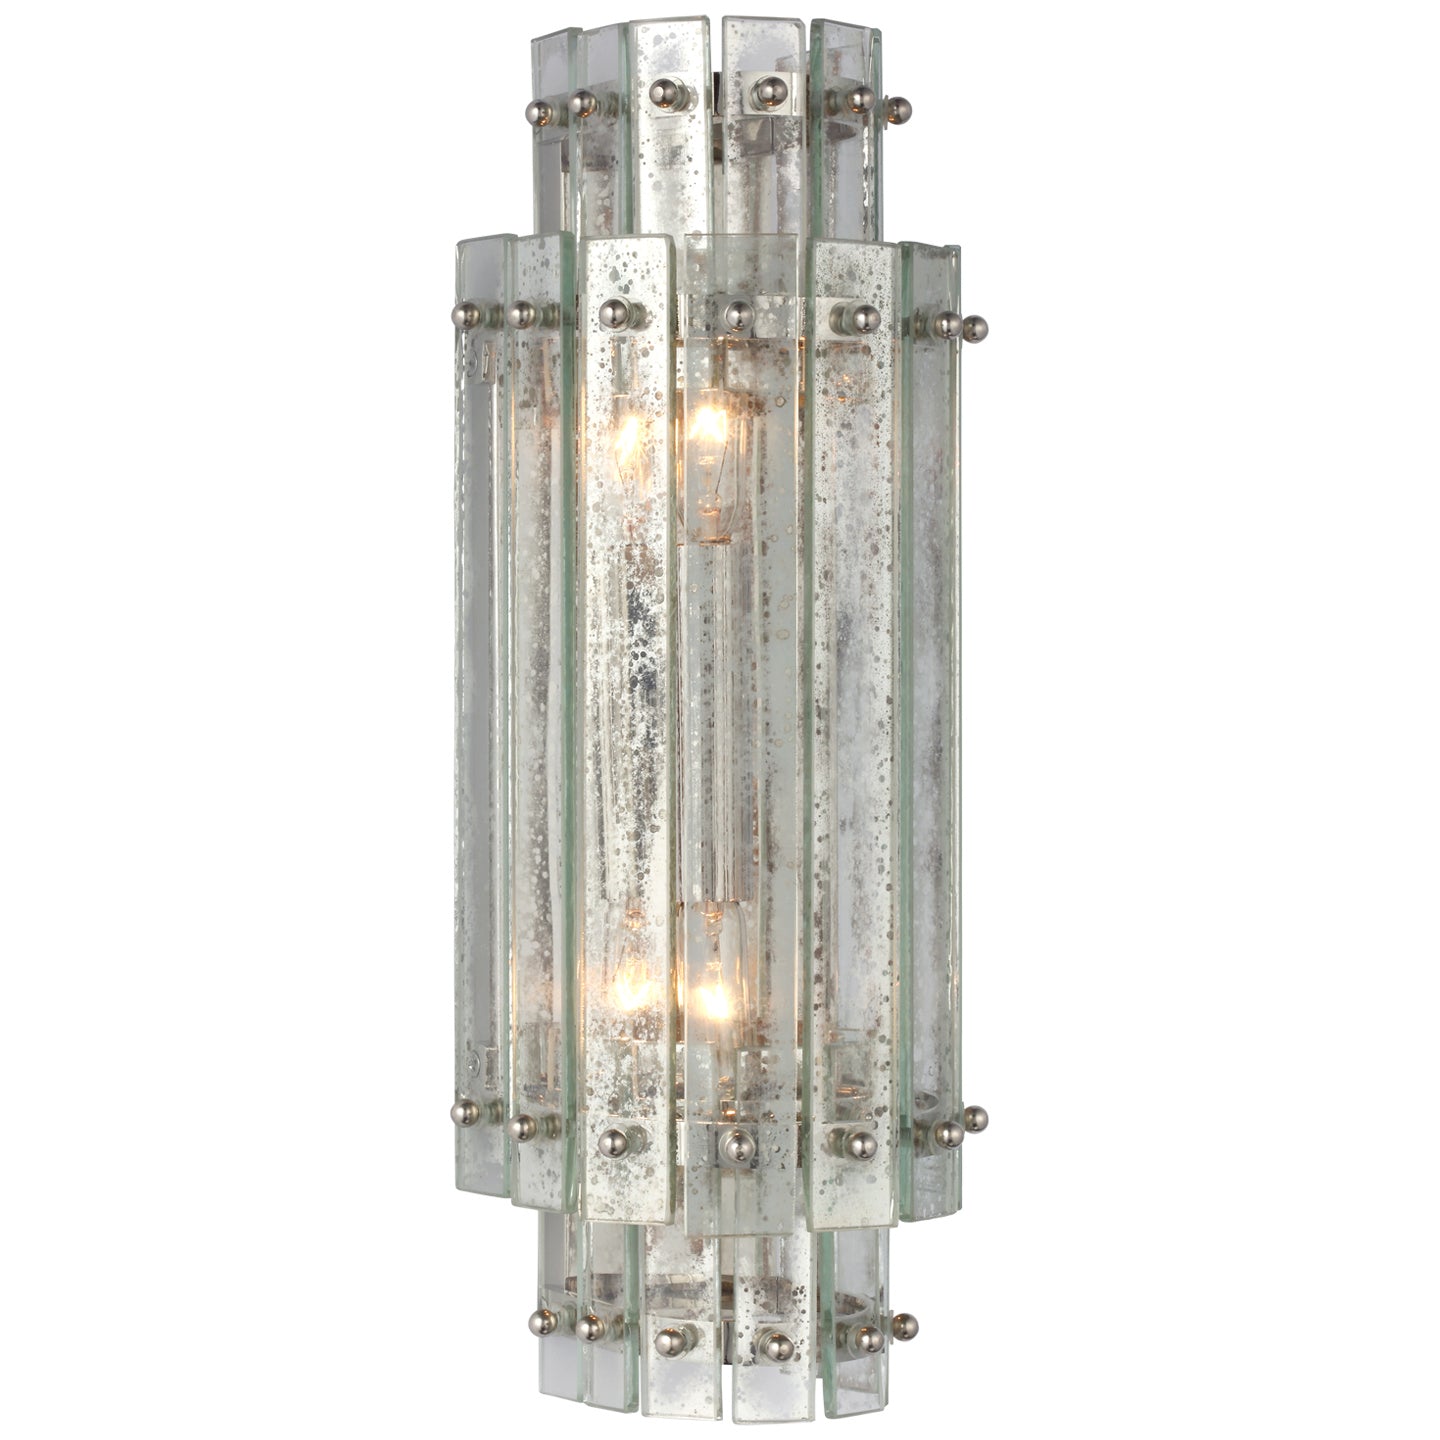 Load image into Gallery viewer, Visual Comfort Signature - S 2649PN-AM - LED Wall Sconce - Cadence - Polished Nickel
